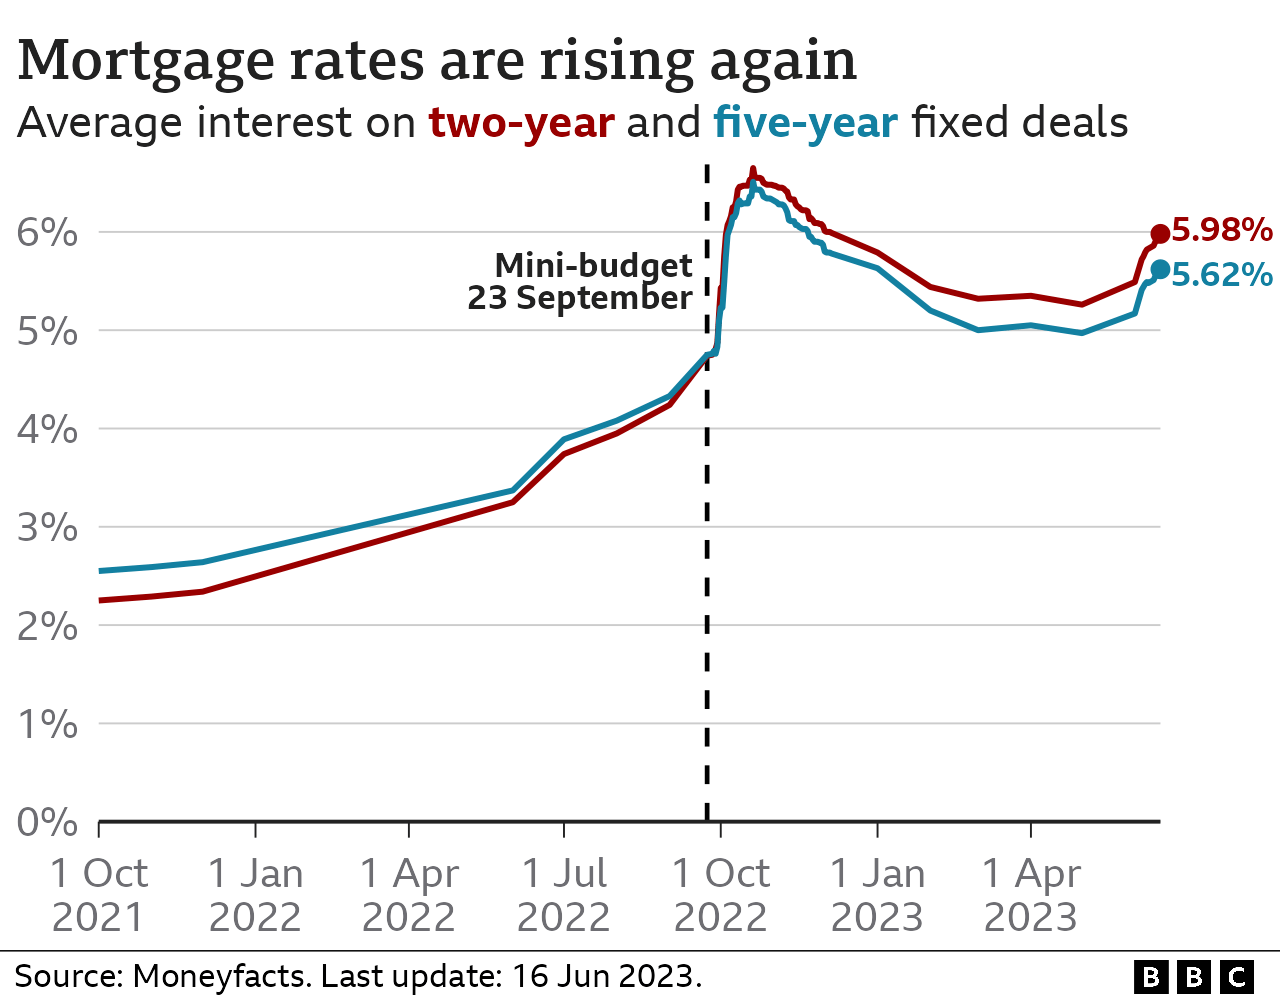 Line chart showing the average interest rate charged on two-year and five-year fixed deals. The two-year rate was 5.98% on 16 Jun 2023, and it peaked at 6.65% in October 2022. The five-year rate was 5.62%, and it peaked at 6.51%.